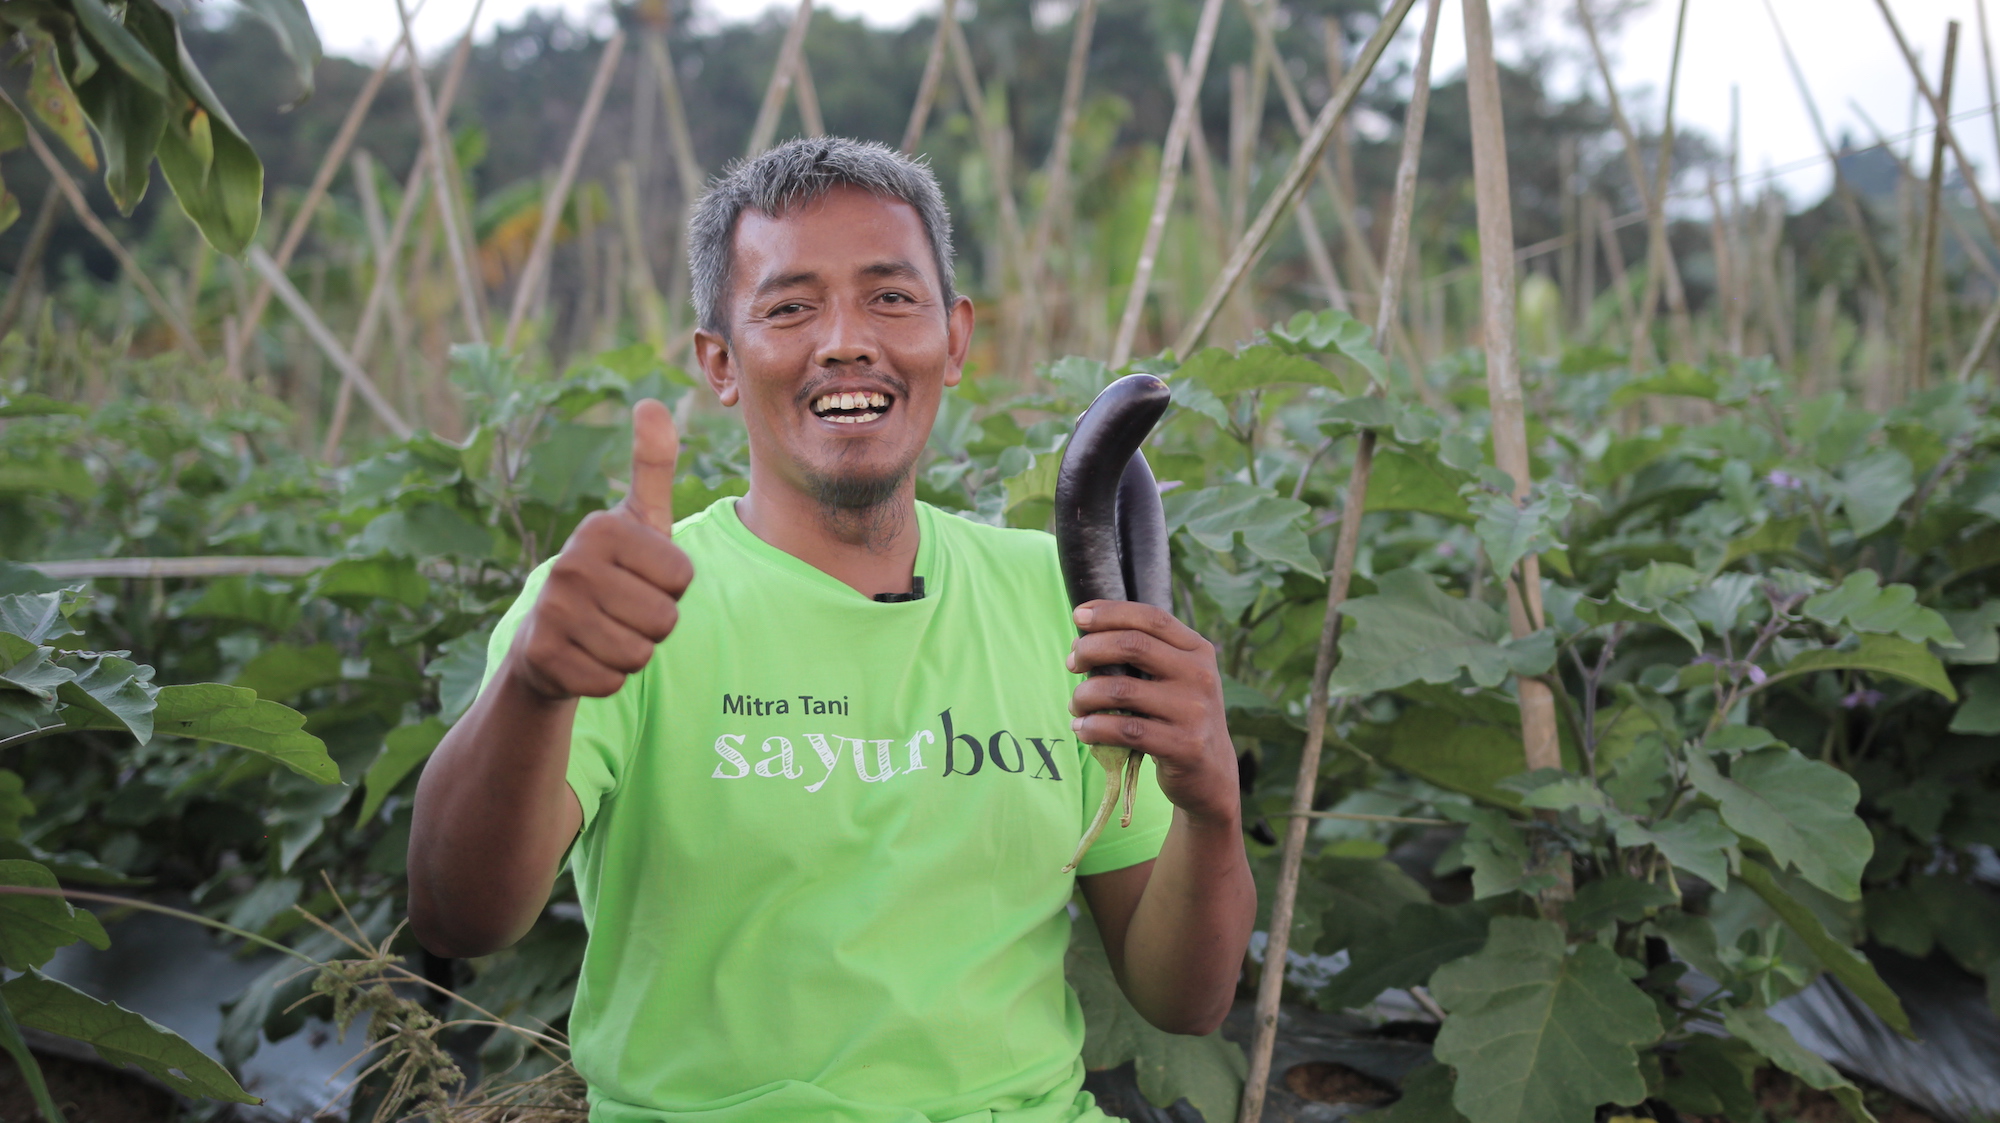 Sayurbox is developing a sustainable agricultural supply chain in Indonesia | Startup Stories